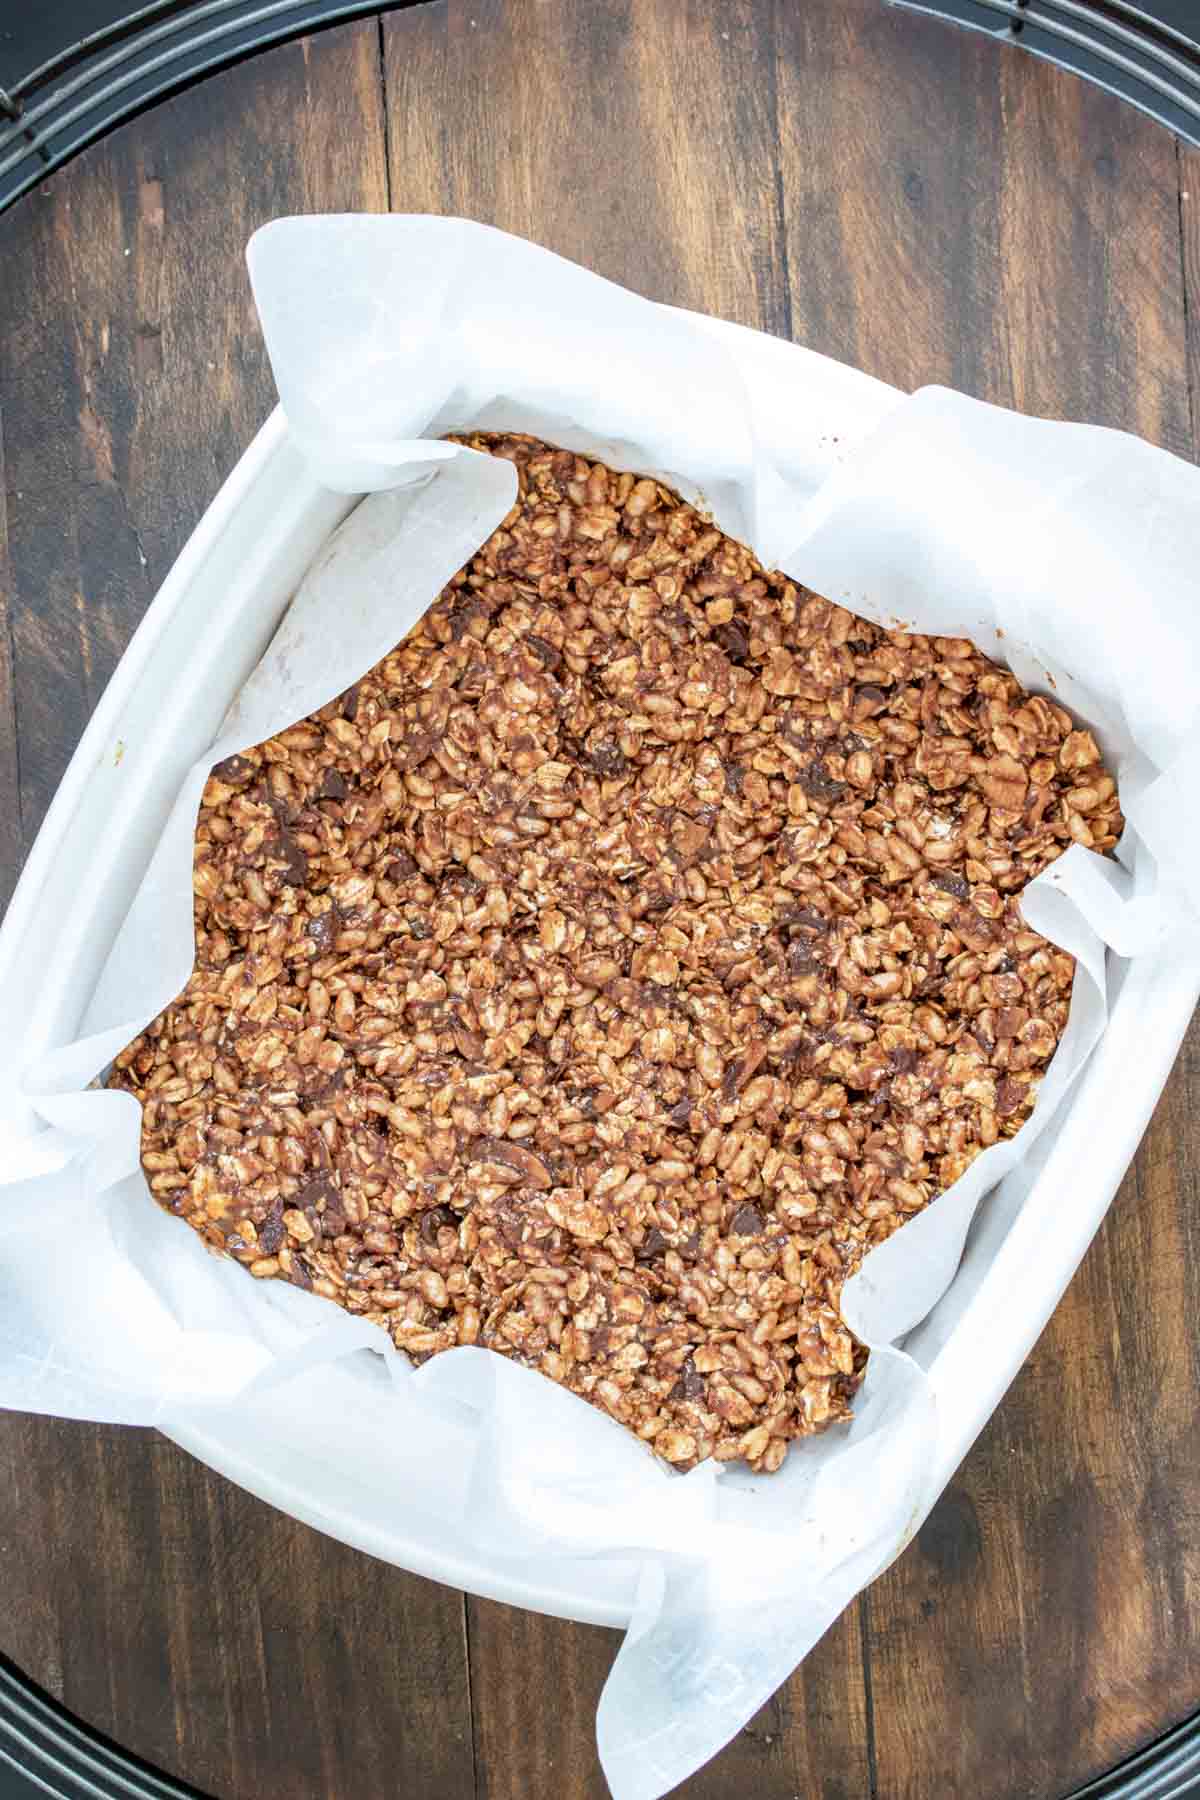 A granola bar mixture pressed into parchment paper in a glass pan